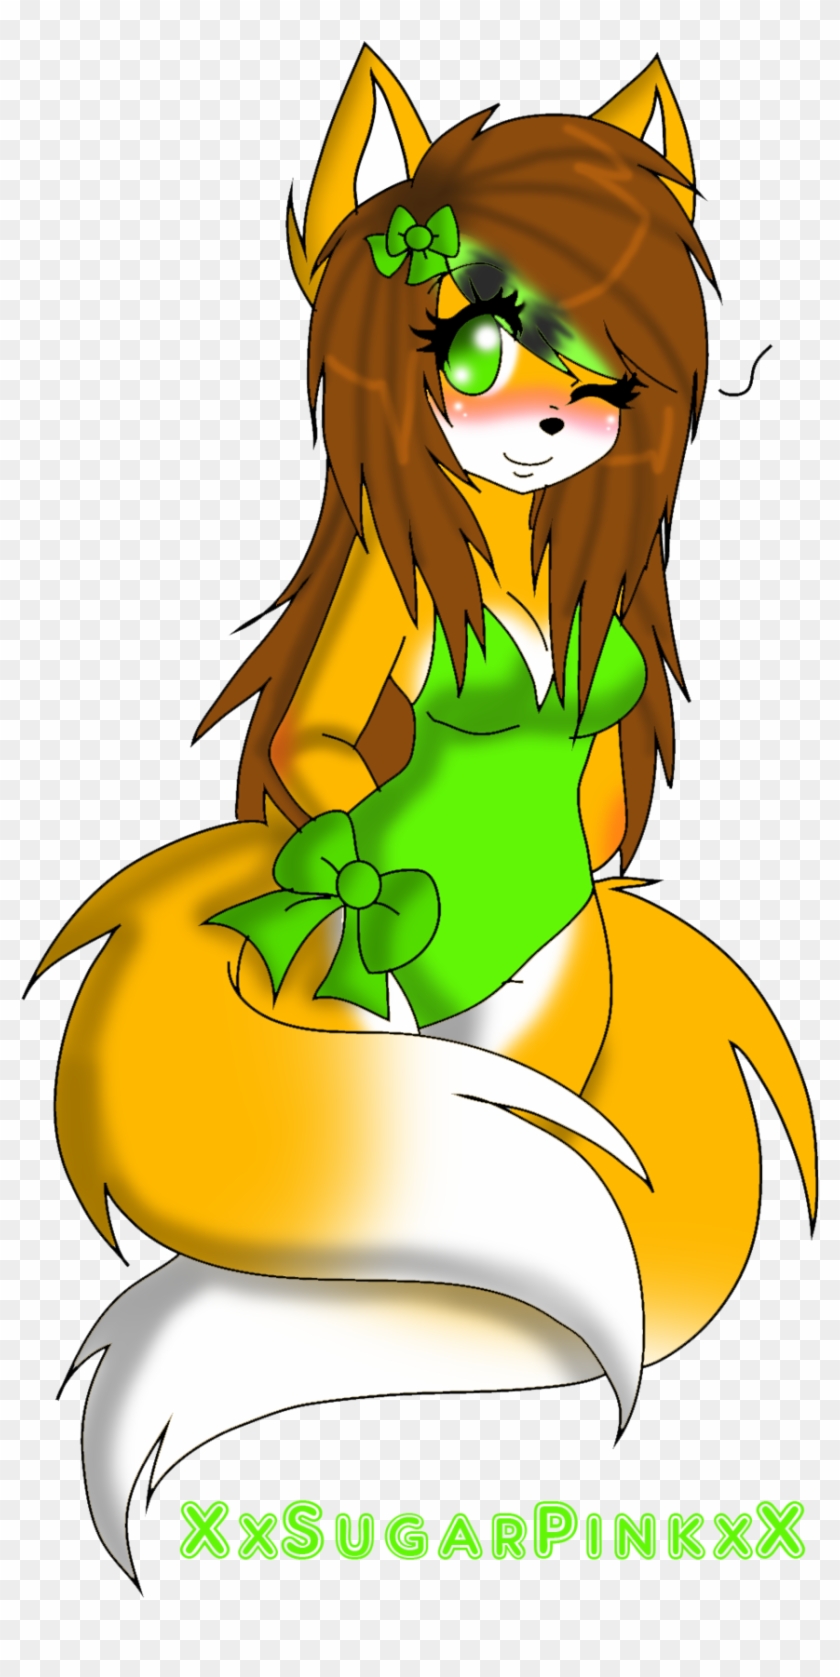 Cute Fox By Xxsugarpinkxx Cute Fox By Xxsugarpinkxx - Anime Pictures Cute Fox #1328484